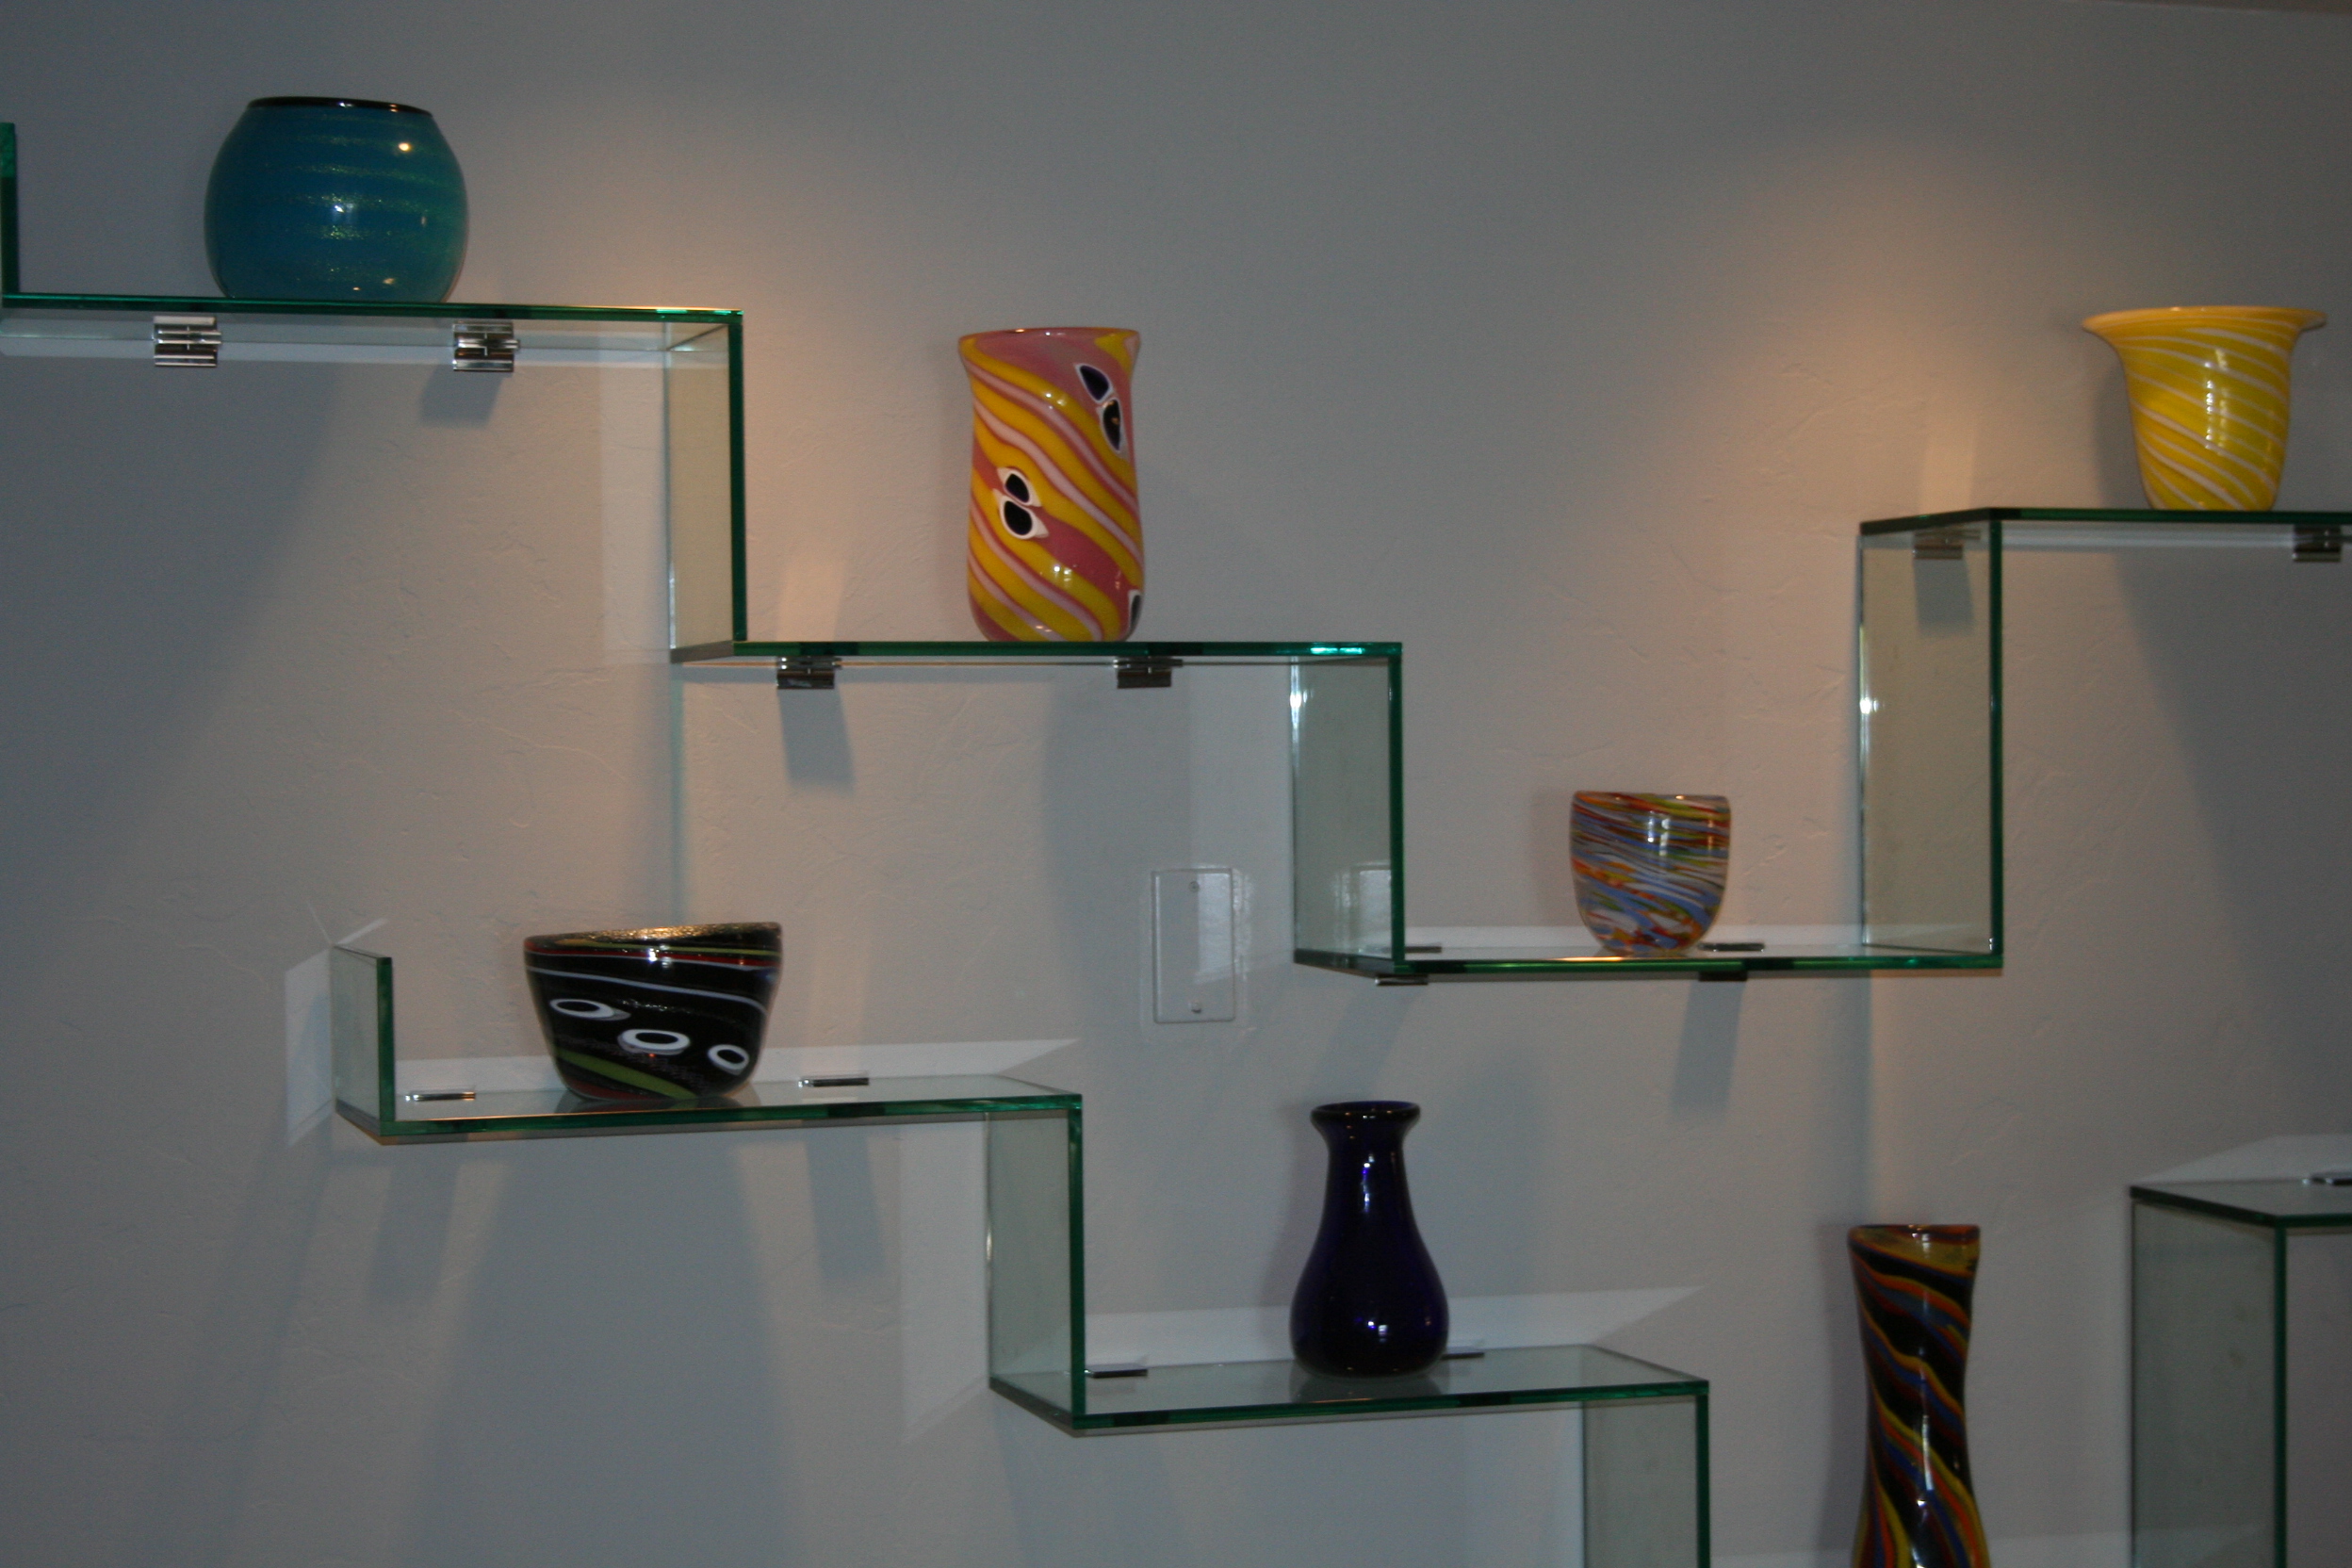  unobstrusive 'U" clamps, to display customer's Art Glass collection